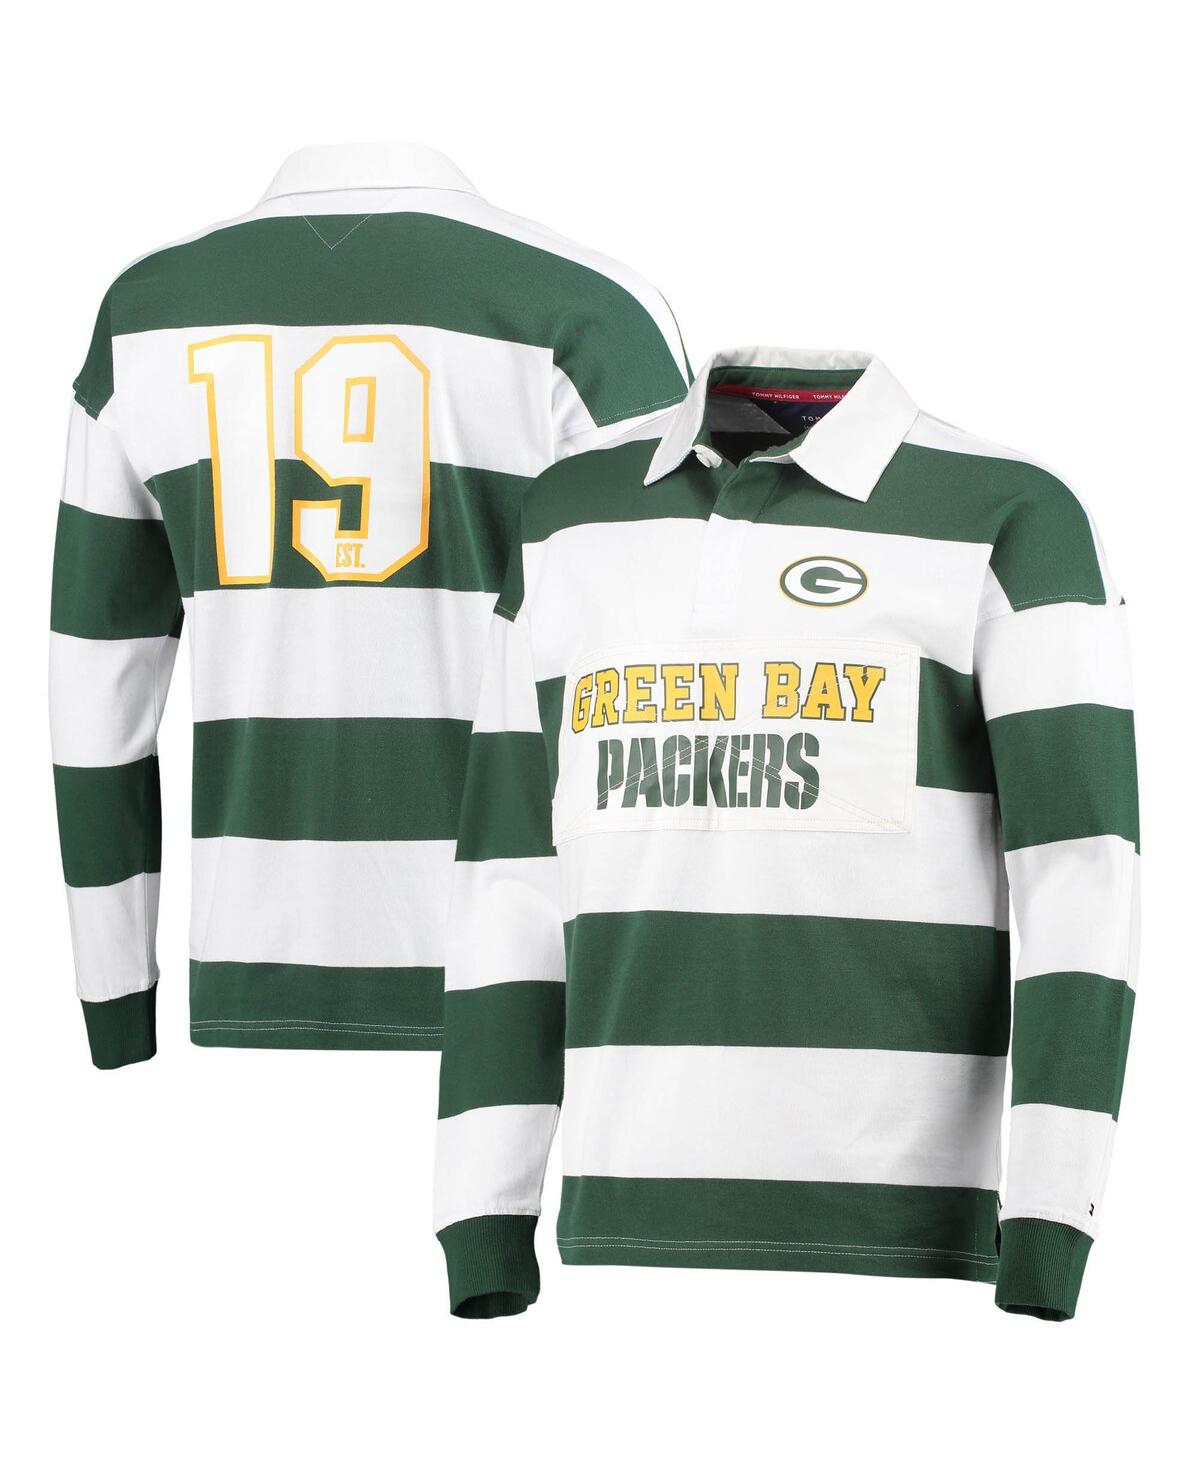 UPC 195195409230 product image for Men's Tommy Hilfiger Green and White Green Bay Packers Varsity Stripe Rugby Long | upcitemdb.com